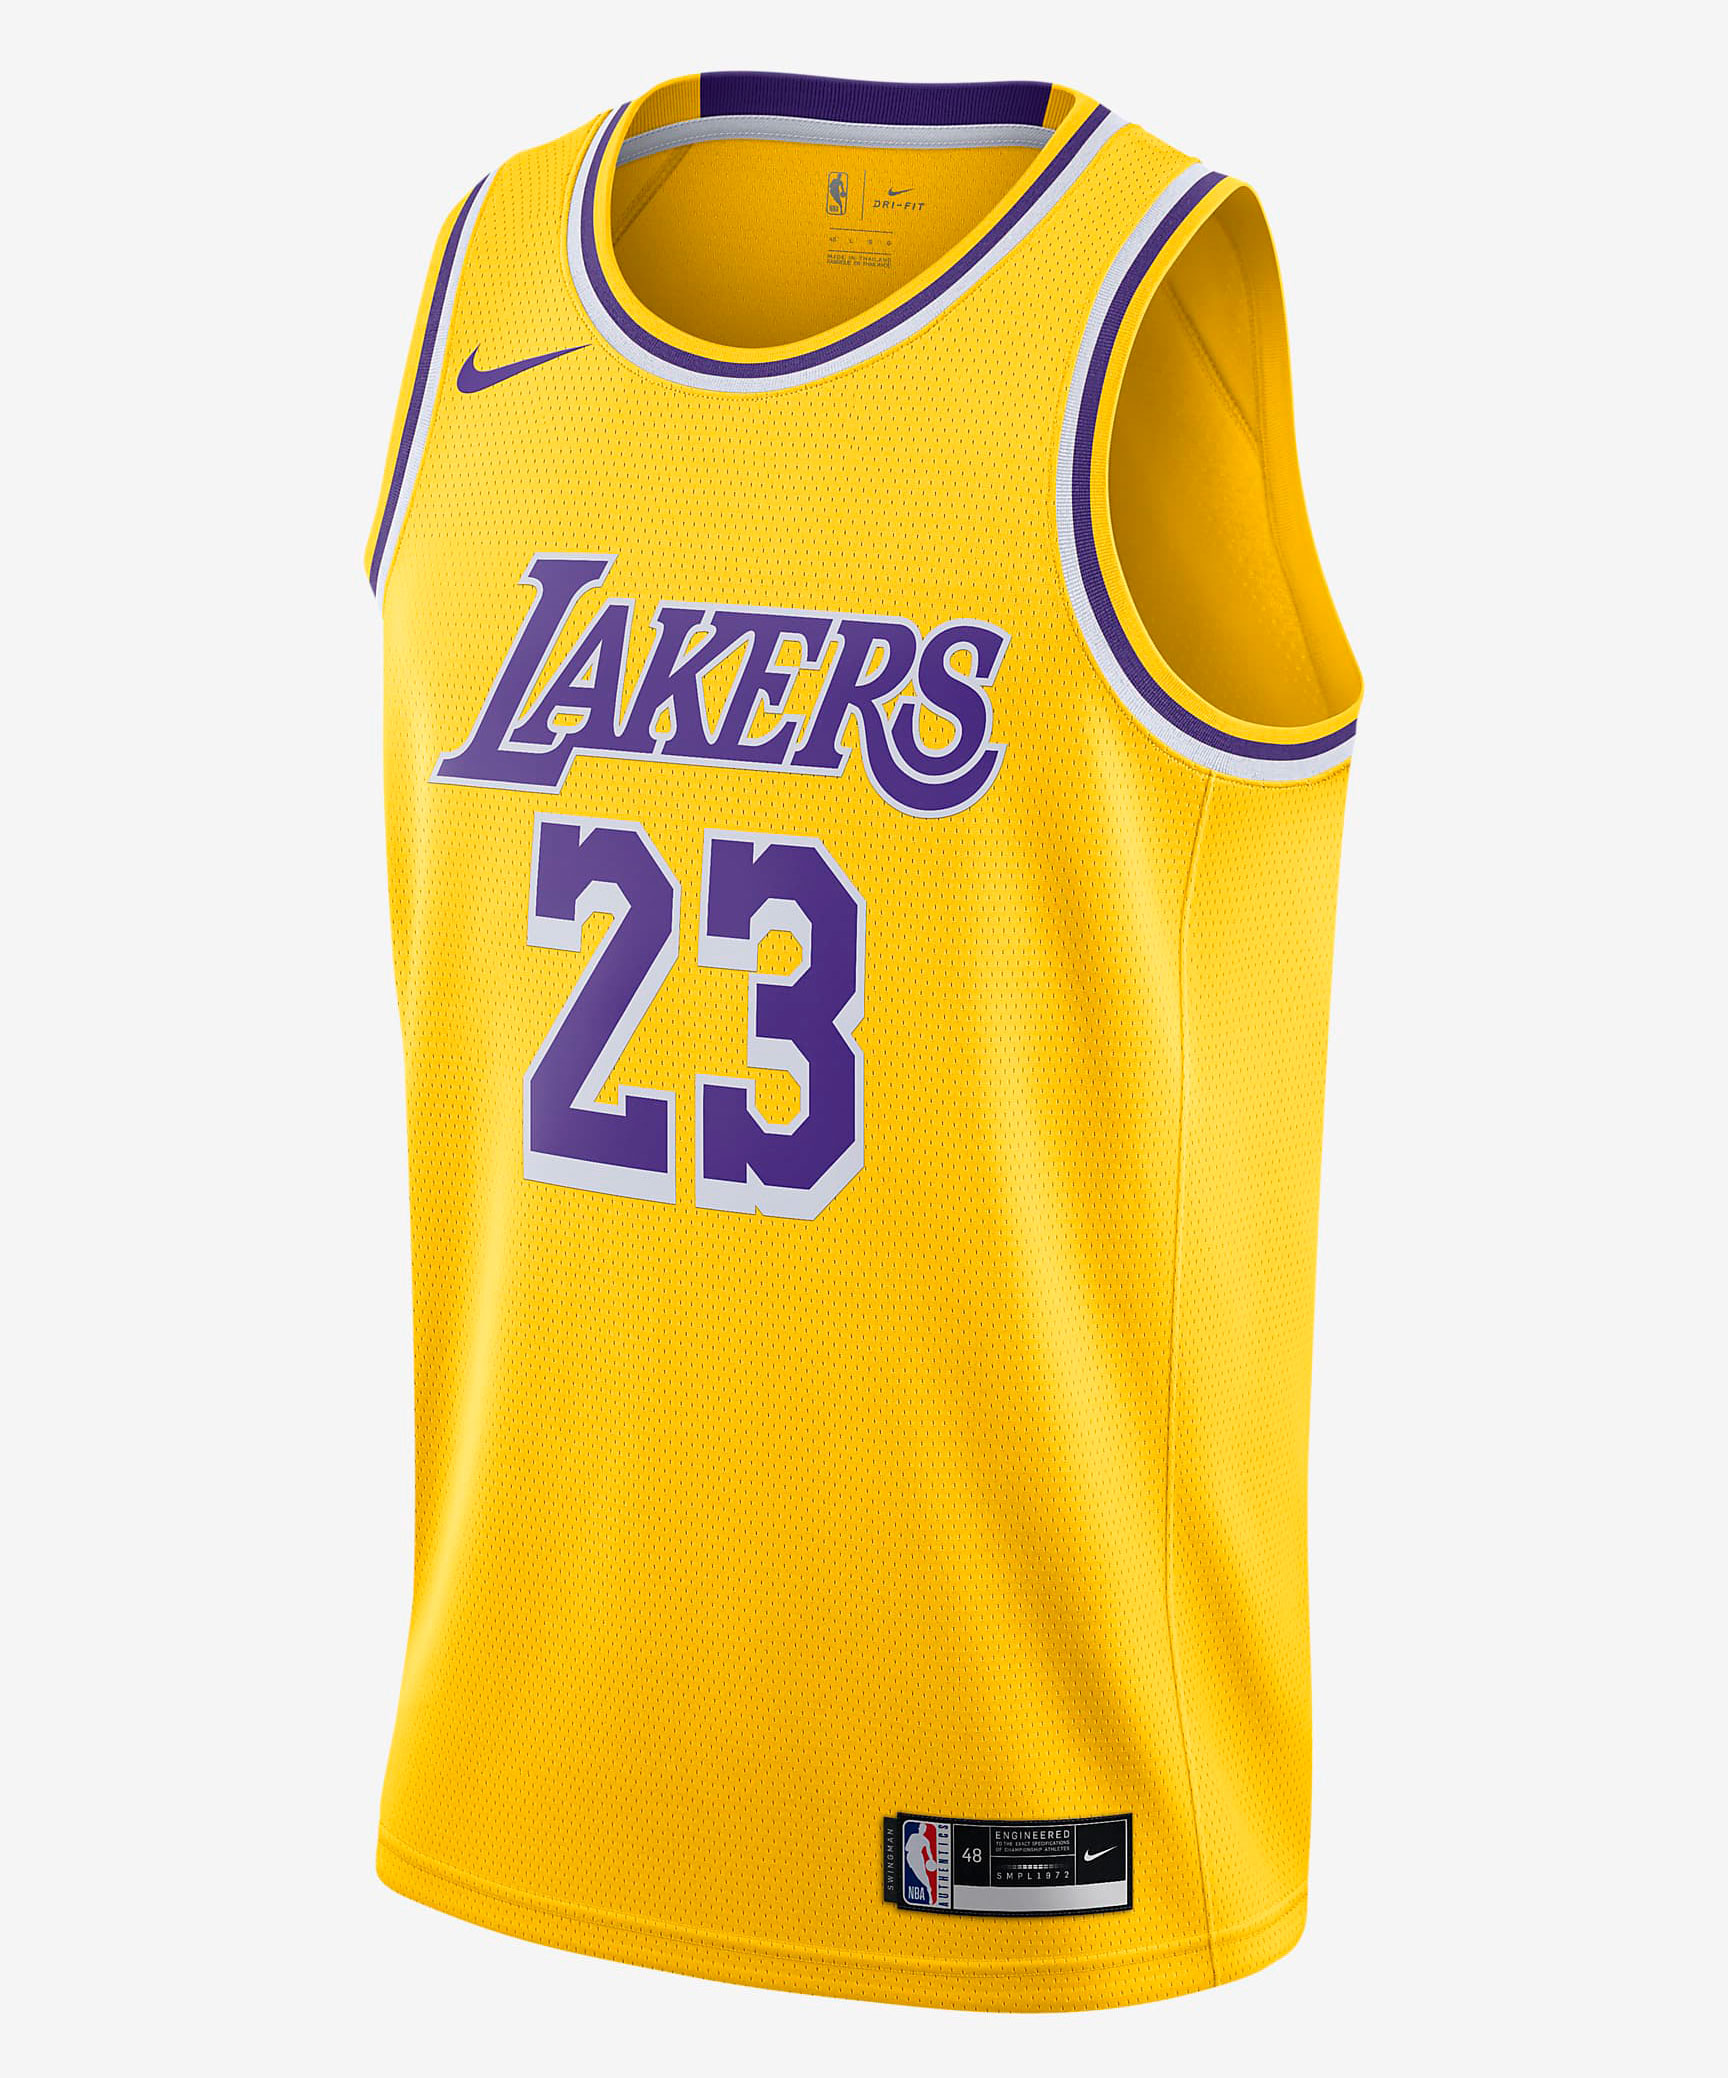 lakers jersey colorways